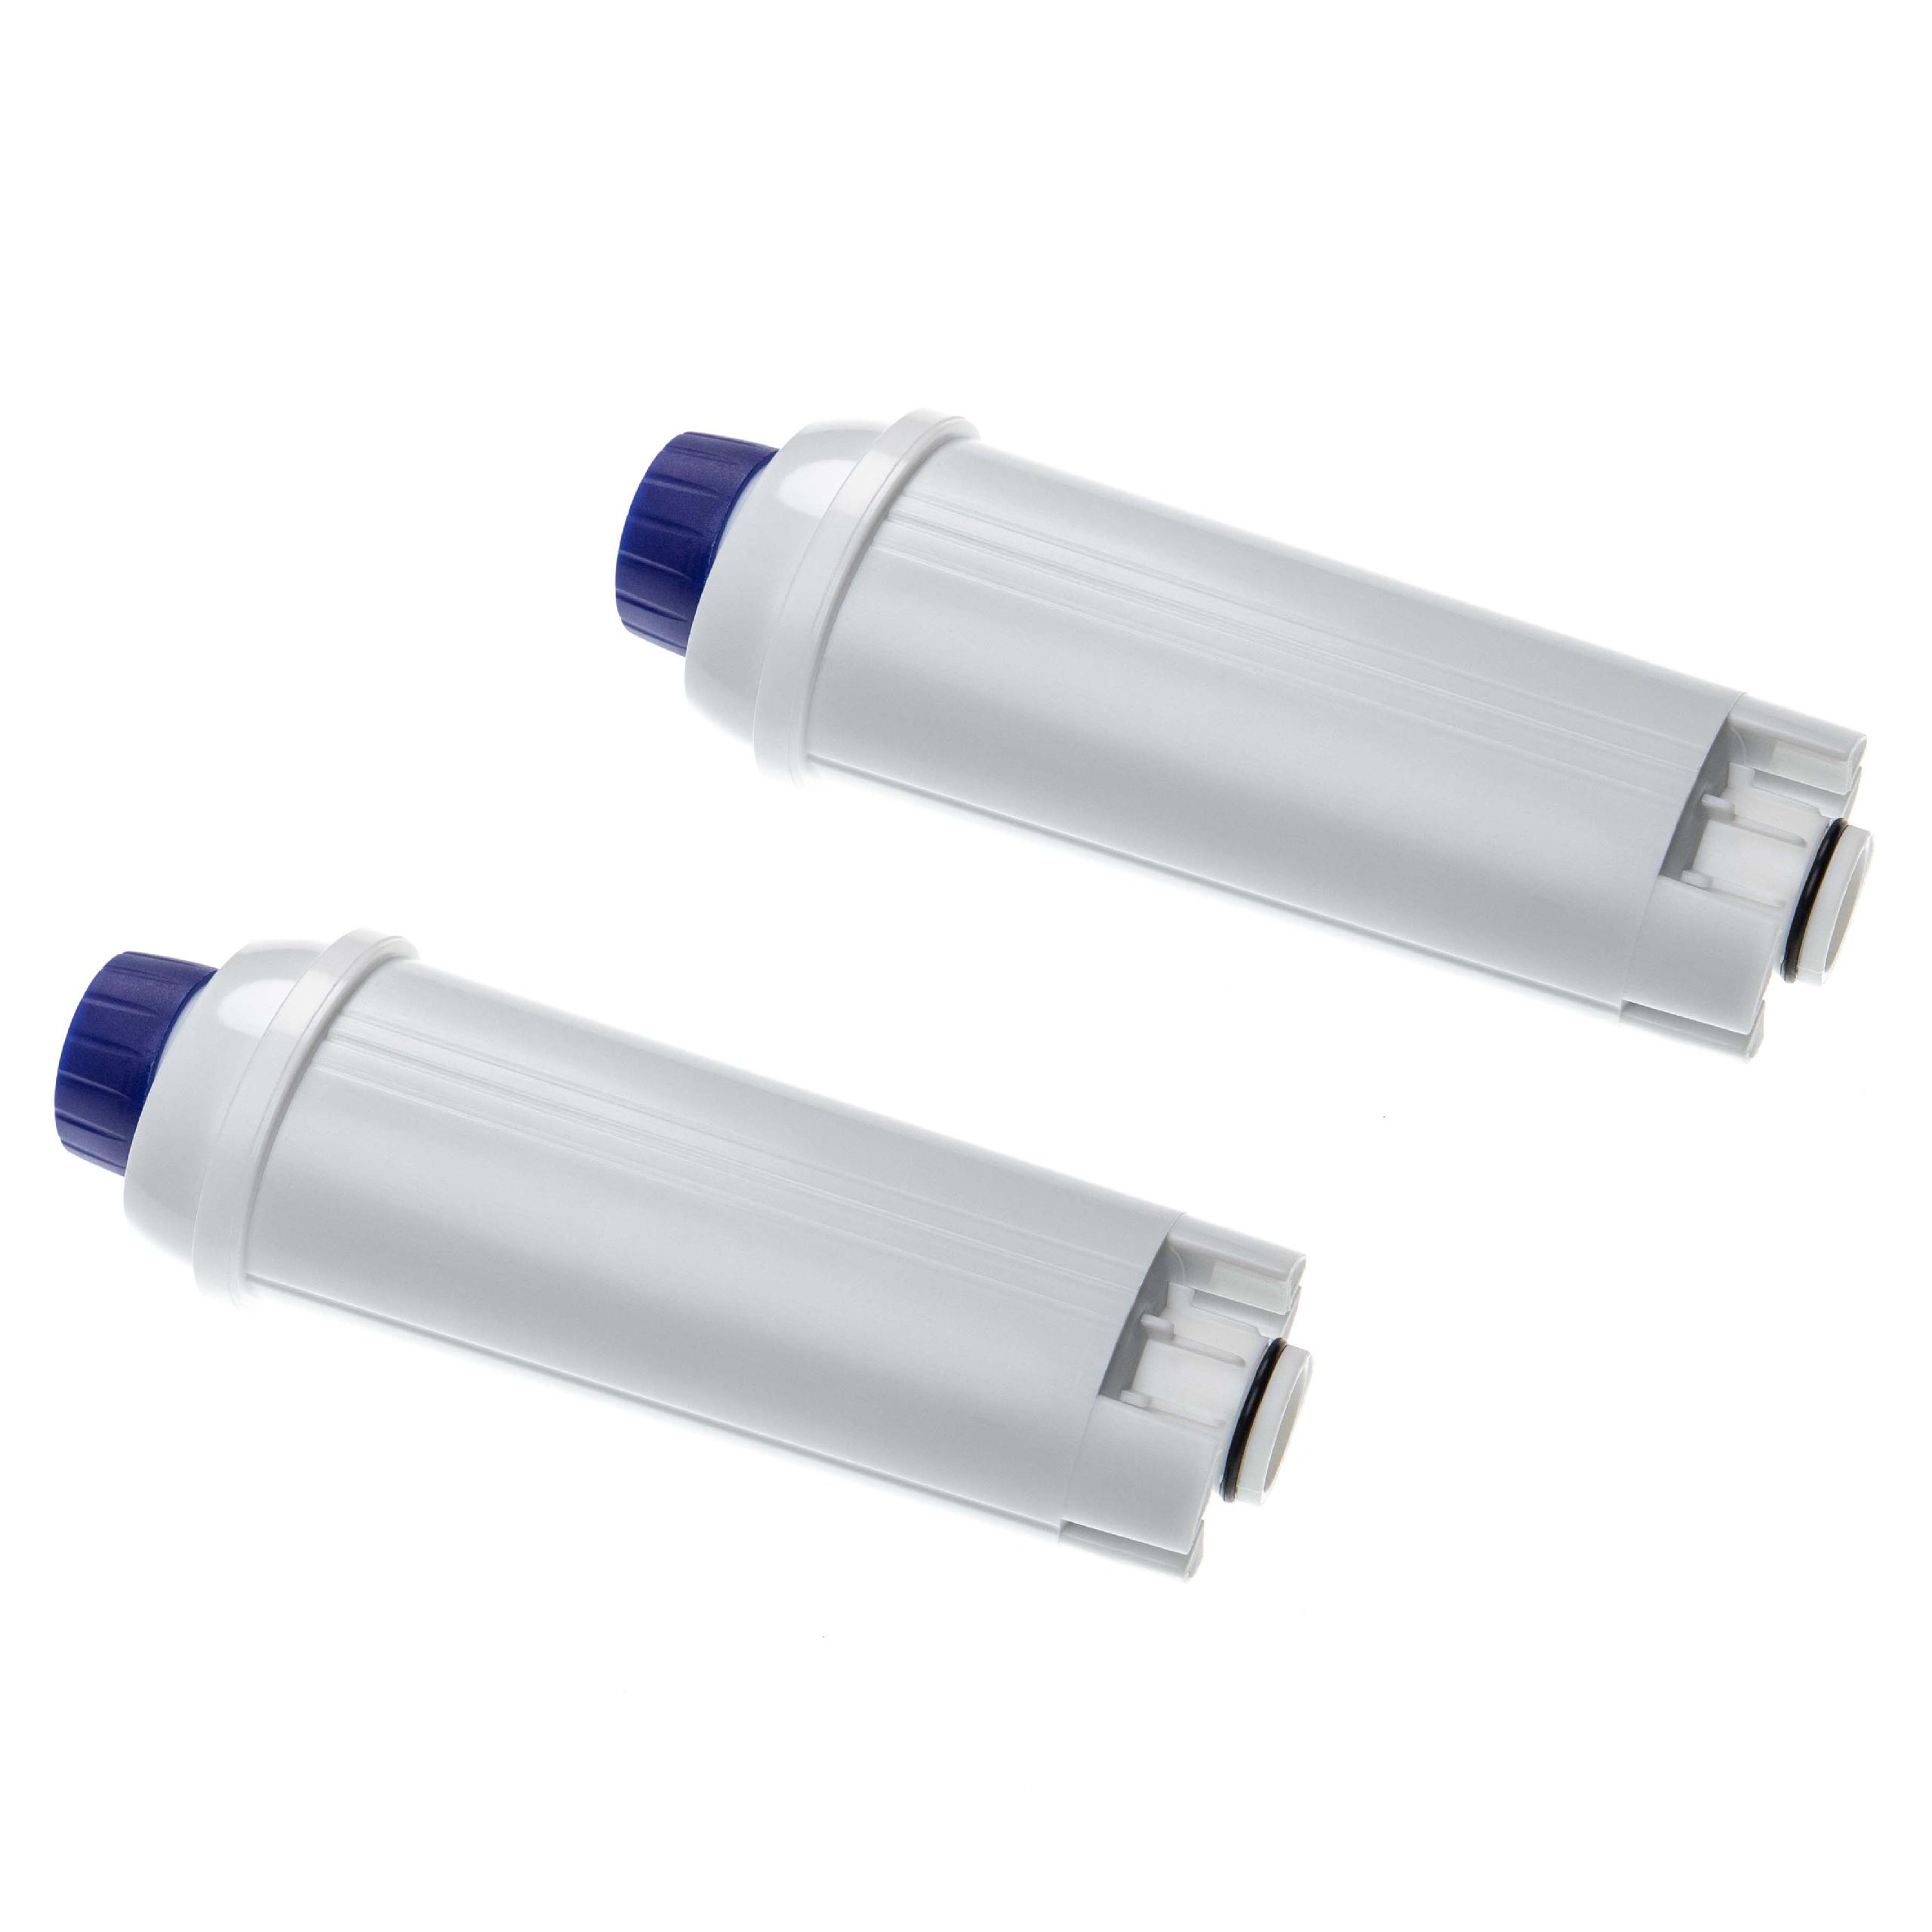 2x Water Filter replaces DeLonghi DLS C002, 8004399327252, 5513292811 for DeLonghi Coffee Machine - White